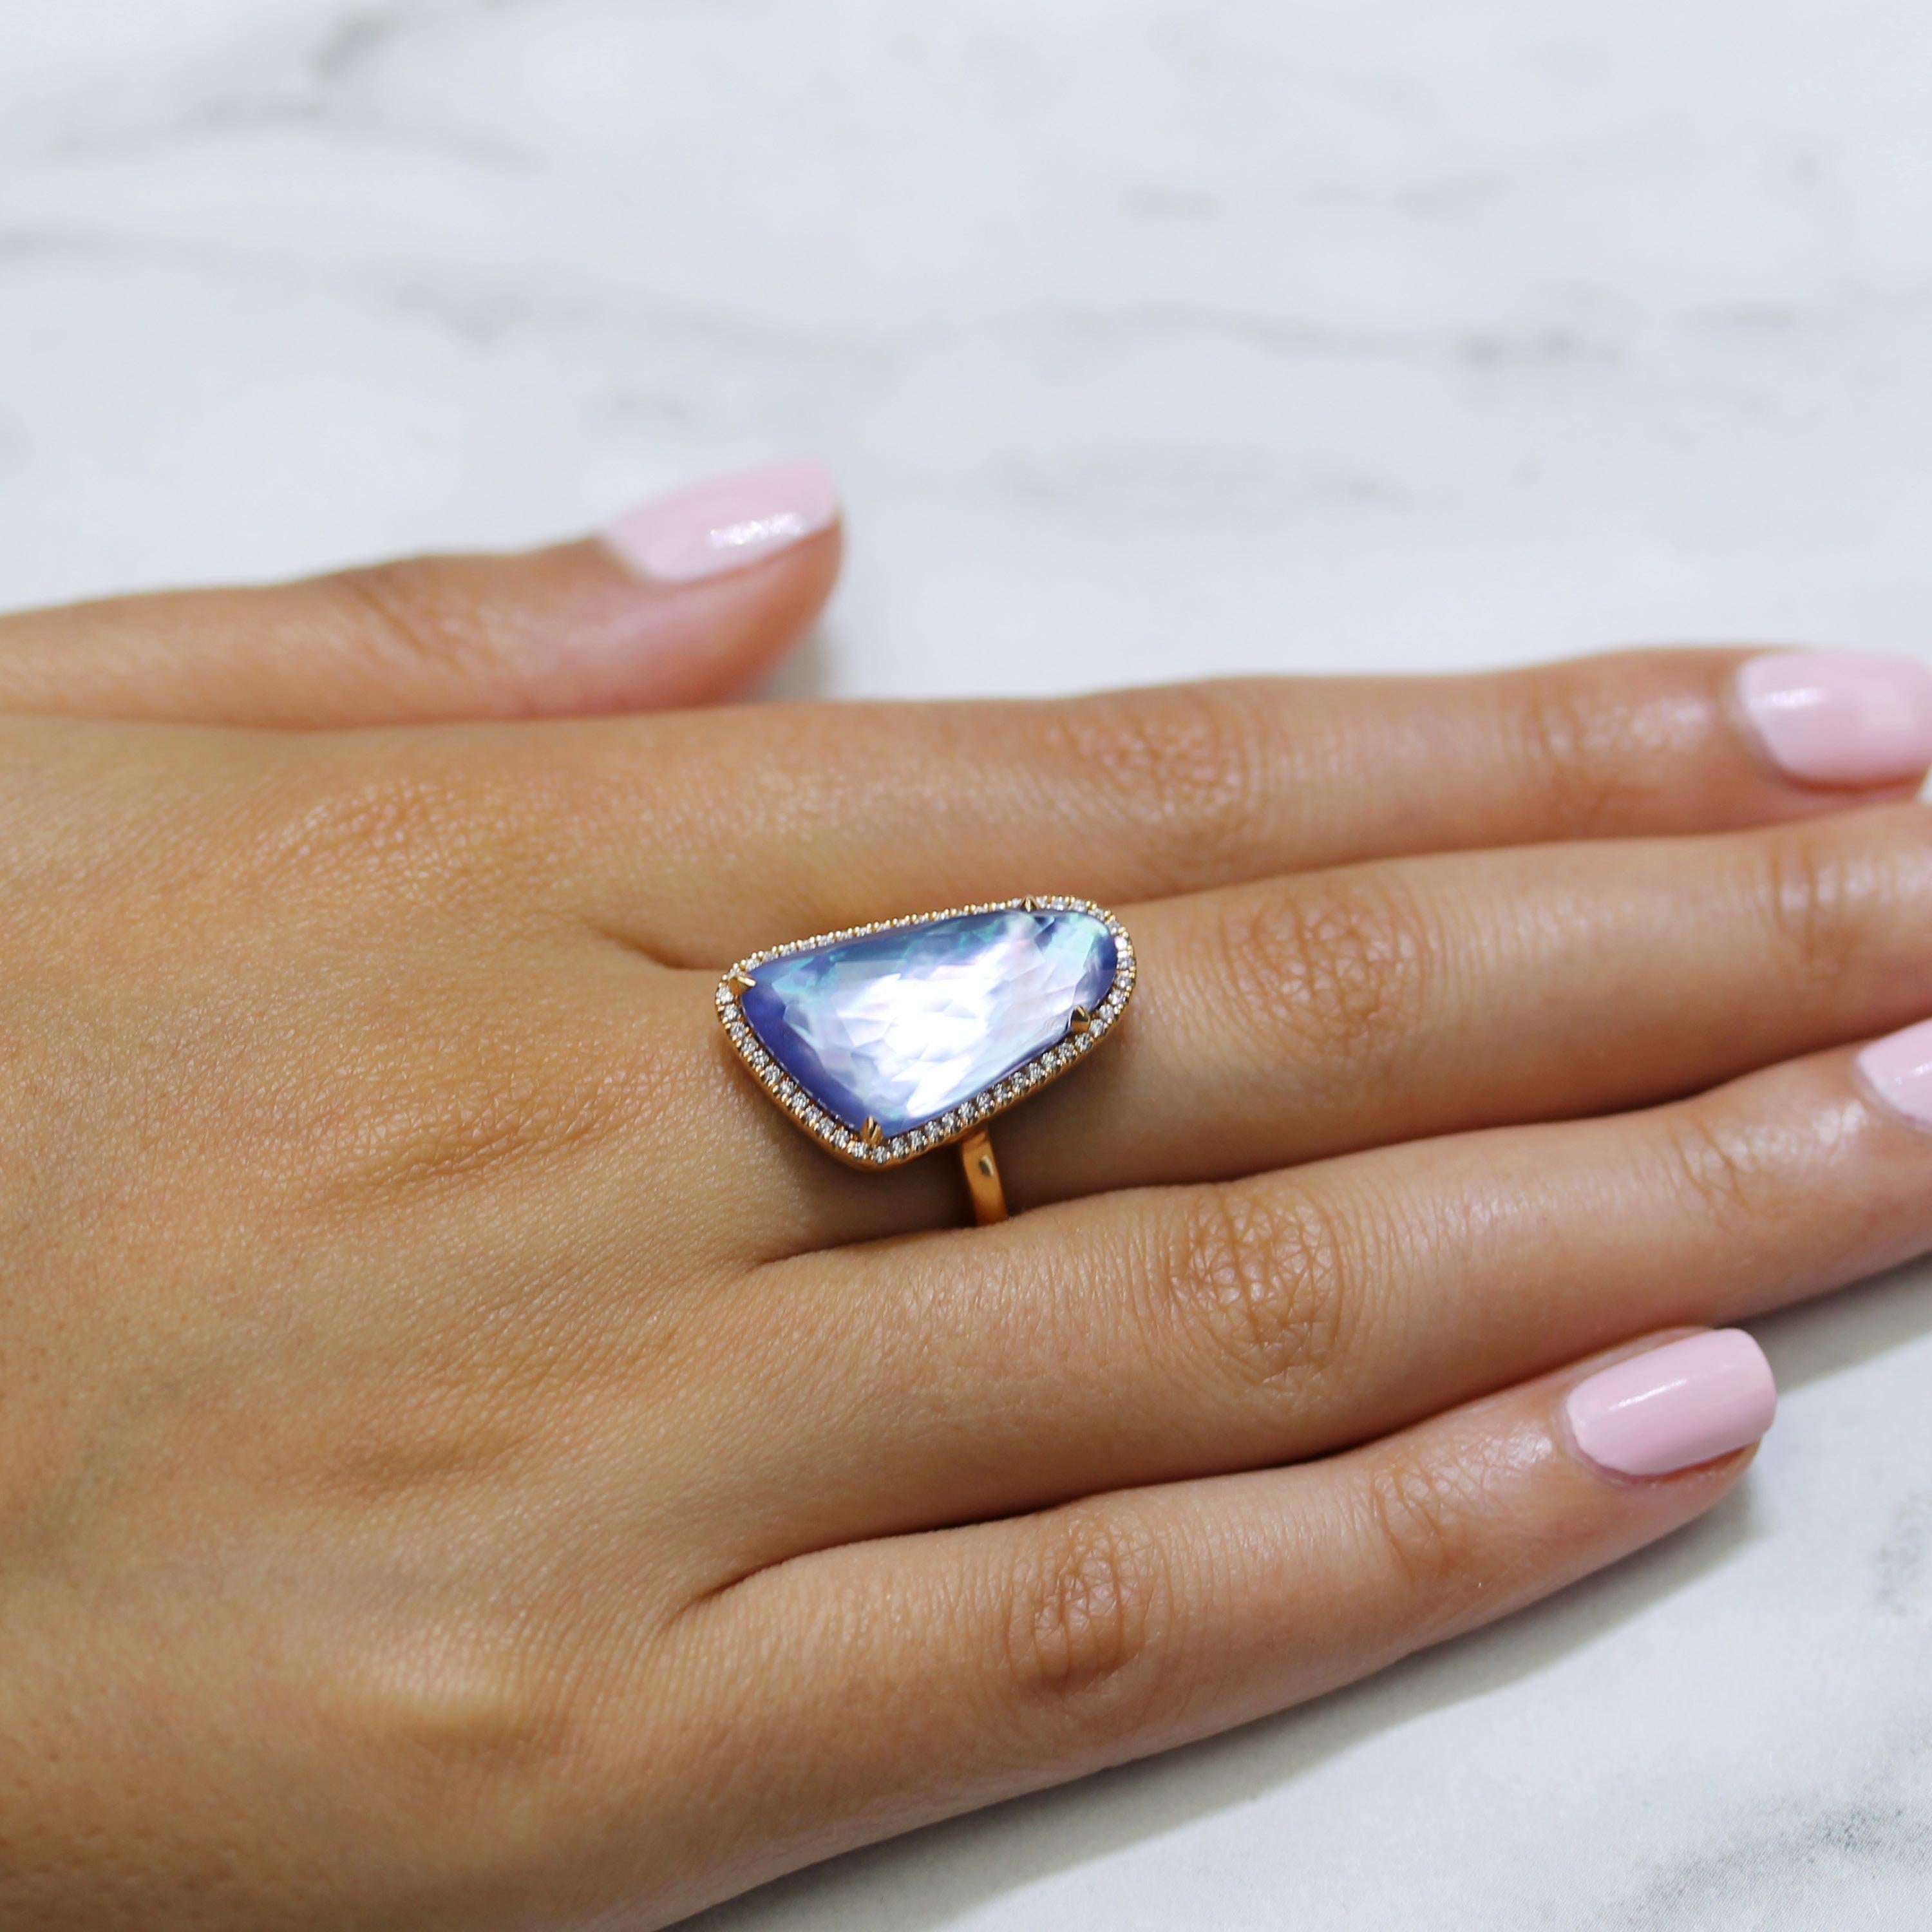 Parisian Plum collection Cocktail Ring featuring an Organic shaped 